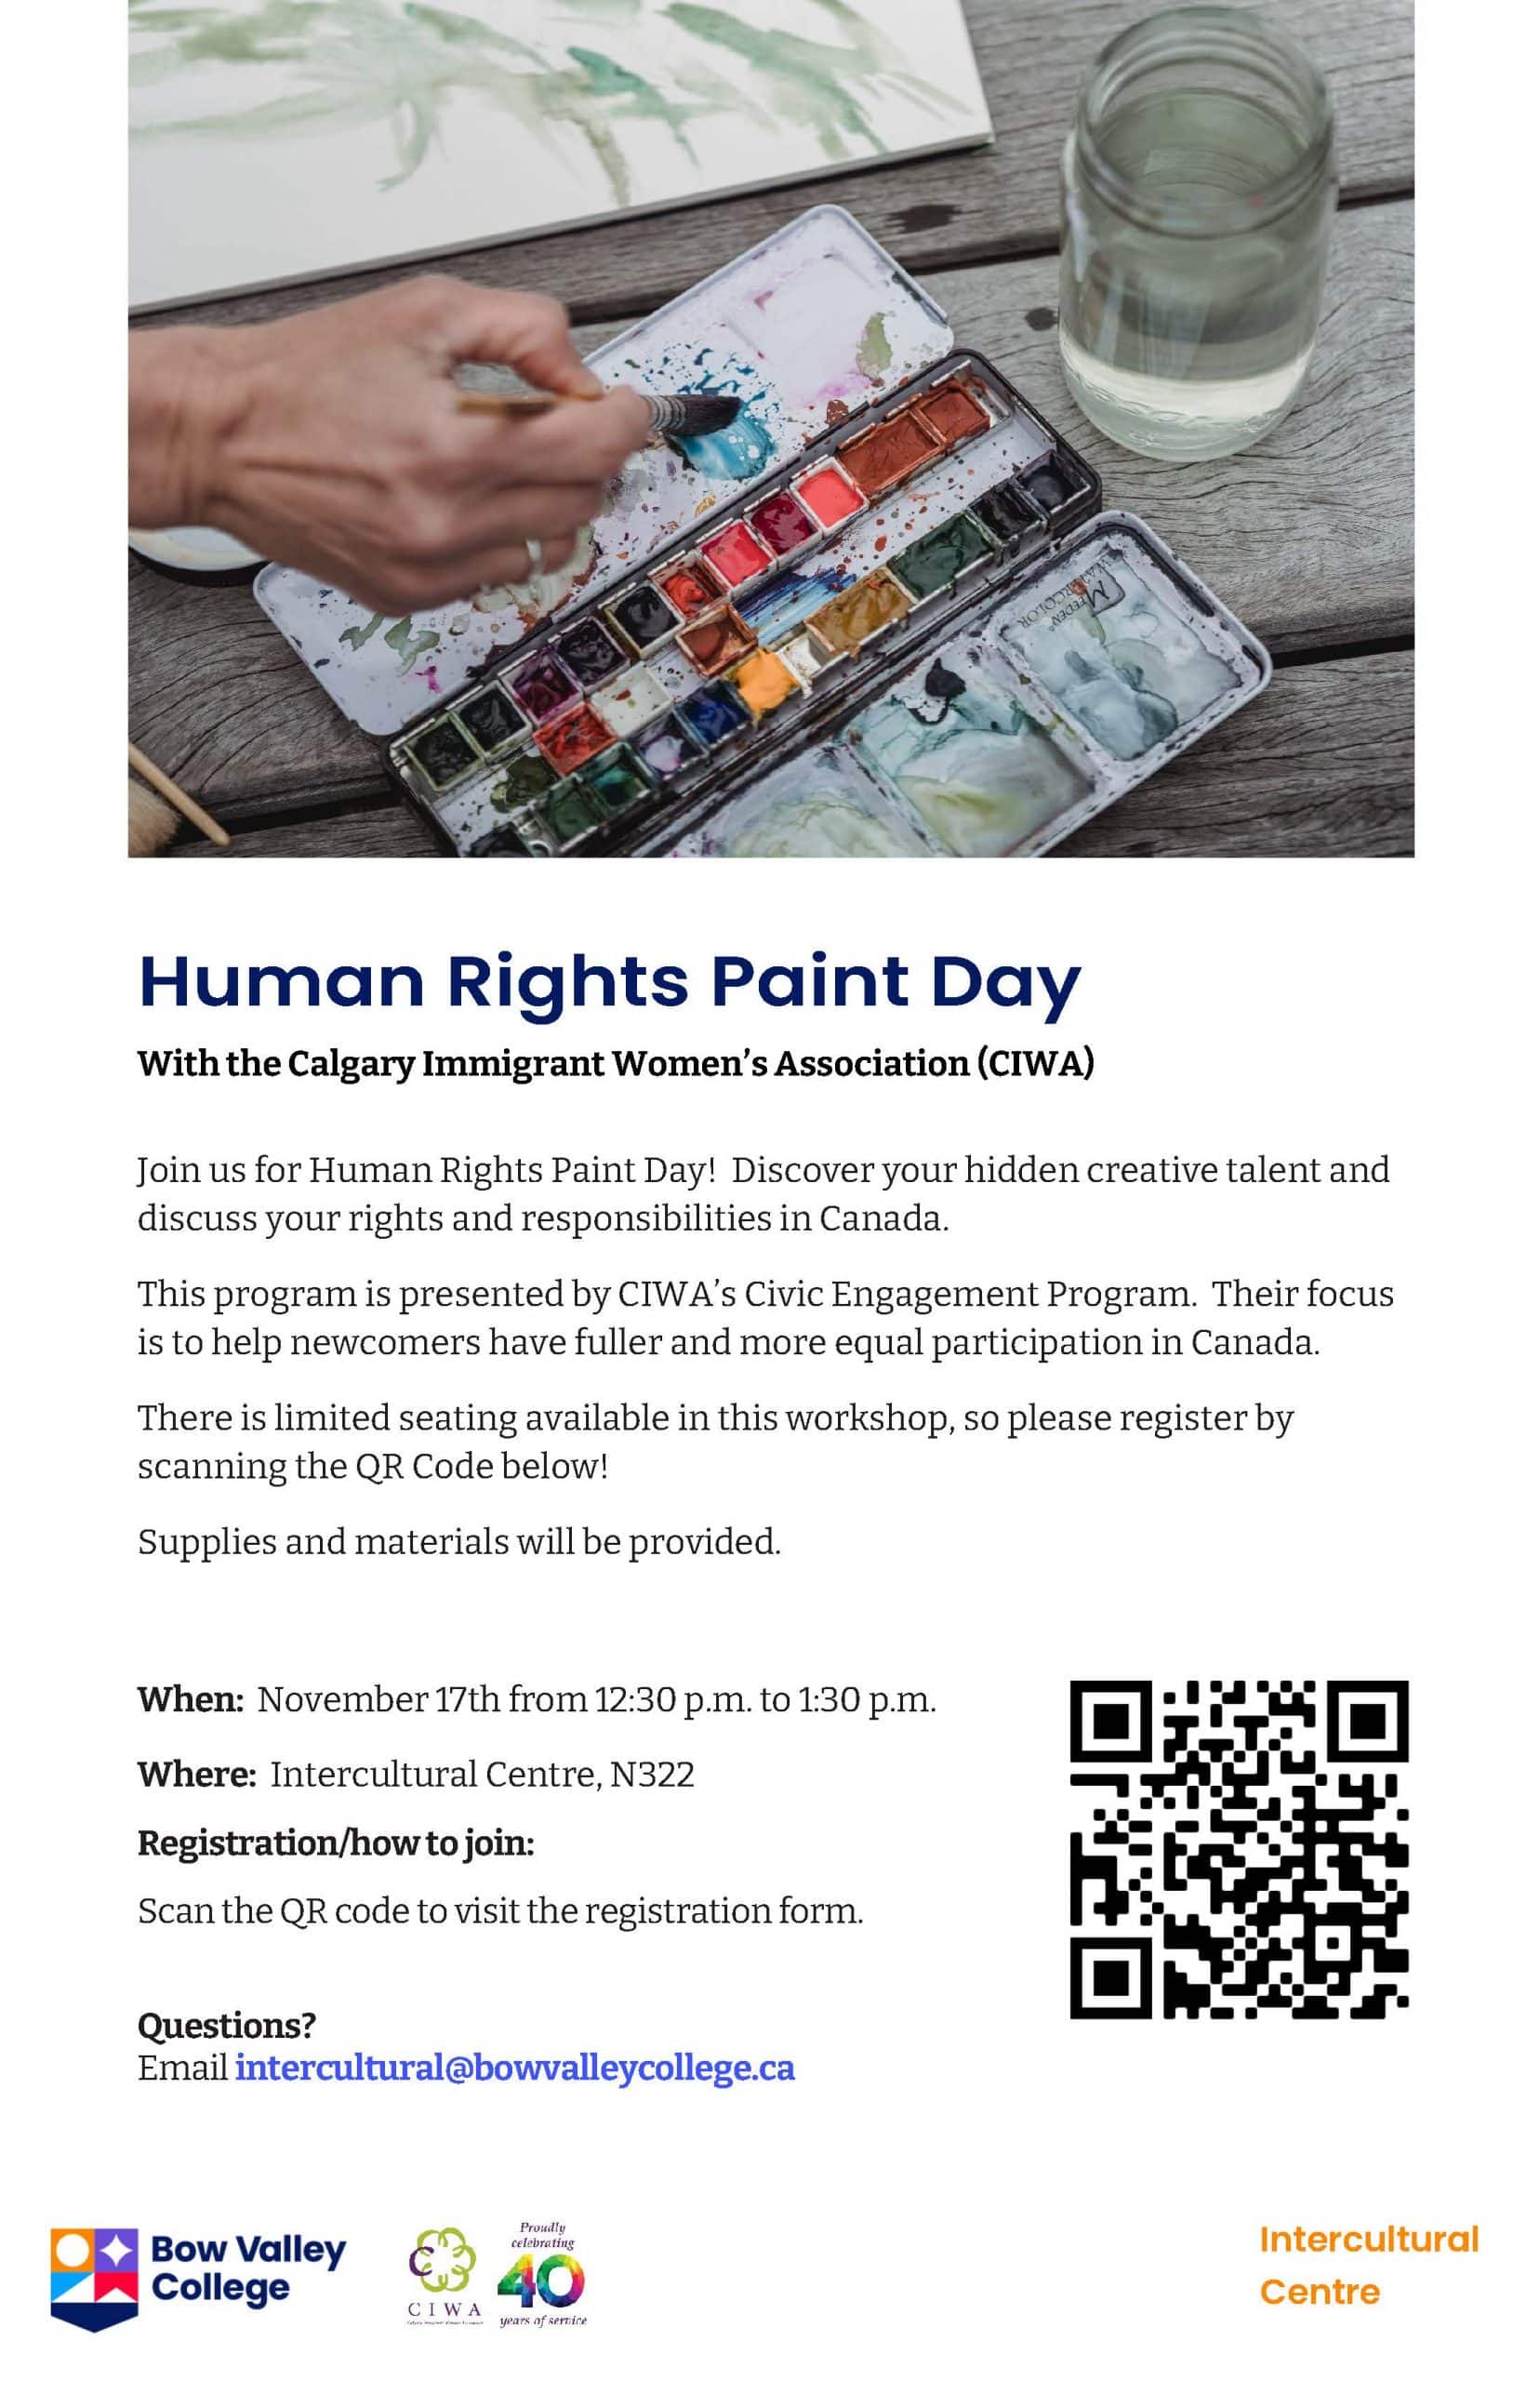 Human Rights Paint Day with Bow Valley College